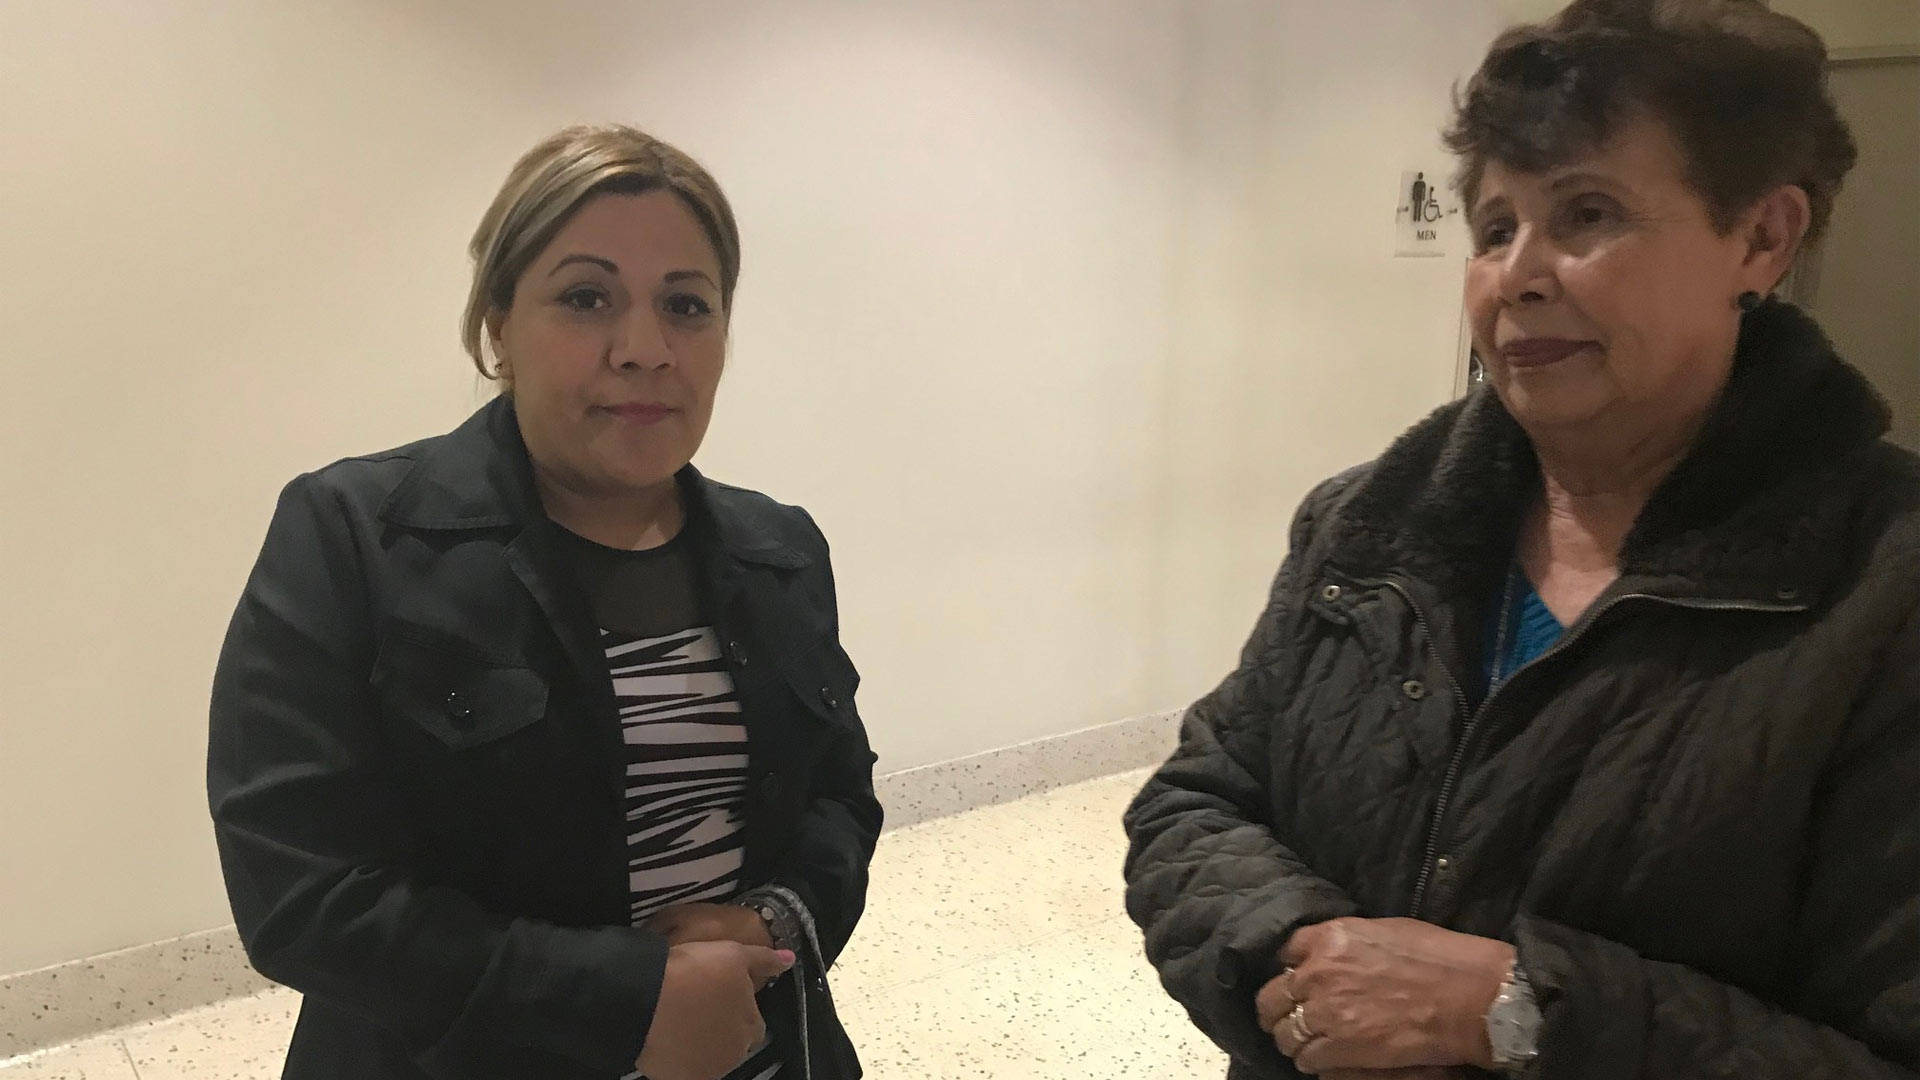 Family members Araceli Rodriquez and Taide Elena wait to enter the courtroom where a U.S. Border Patrol agent is on trial for the death of 16-year-old Jose Antonio Elena Rodriguez.